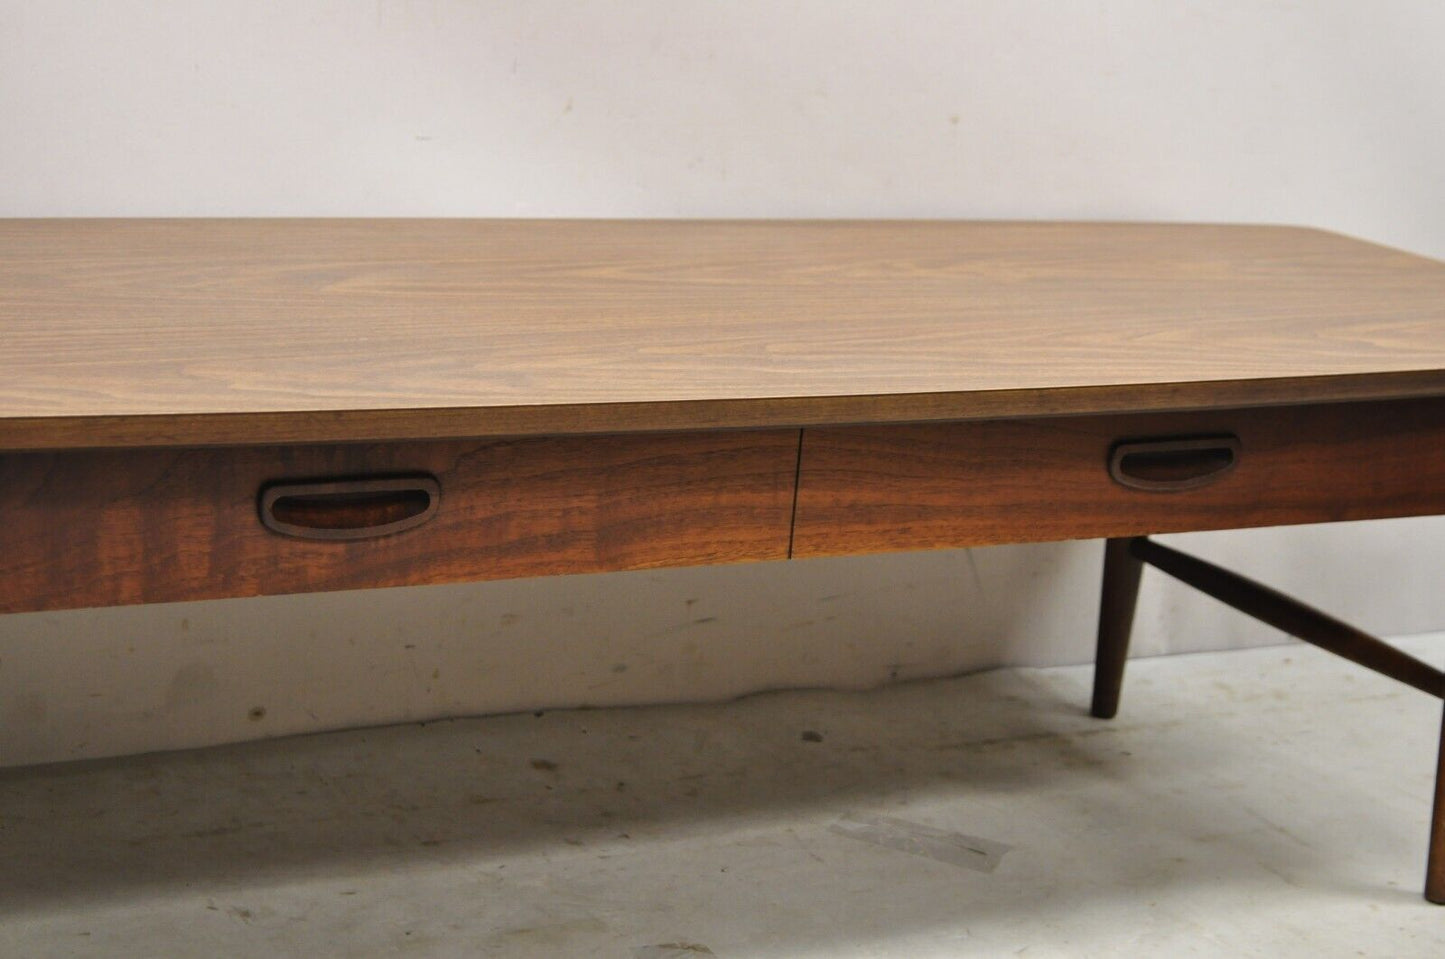 Lane Mid Century Modern 56" Long Surfboard Laminate Top Coffee Table with Drawer